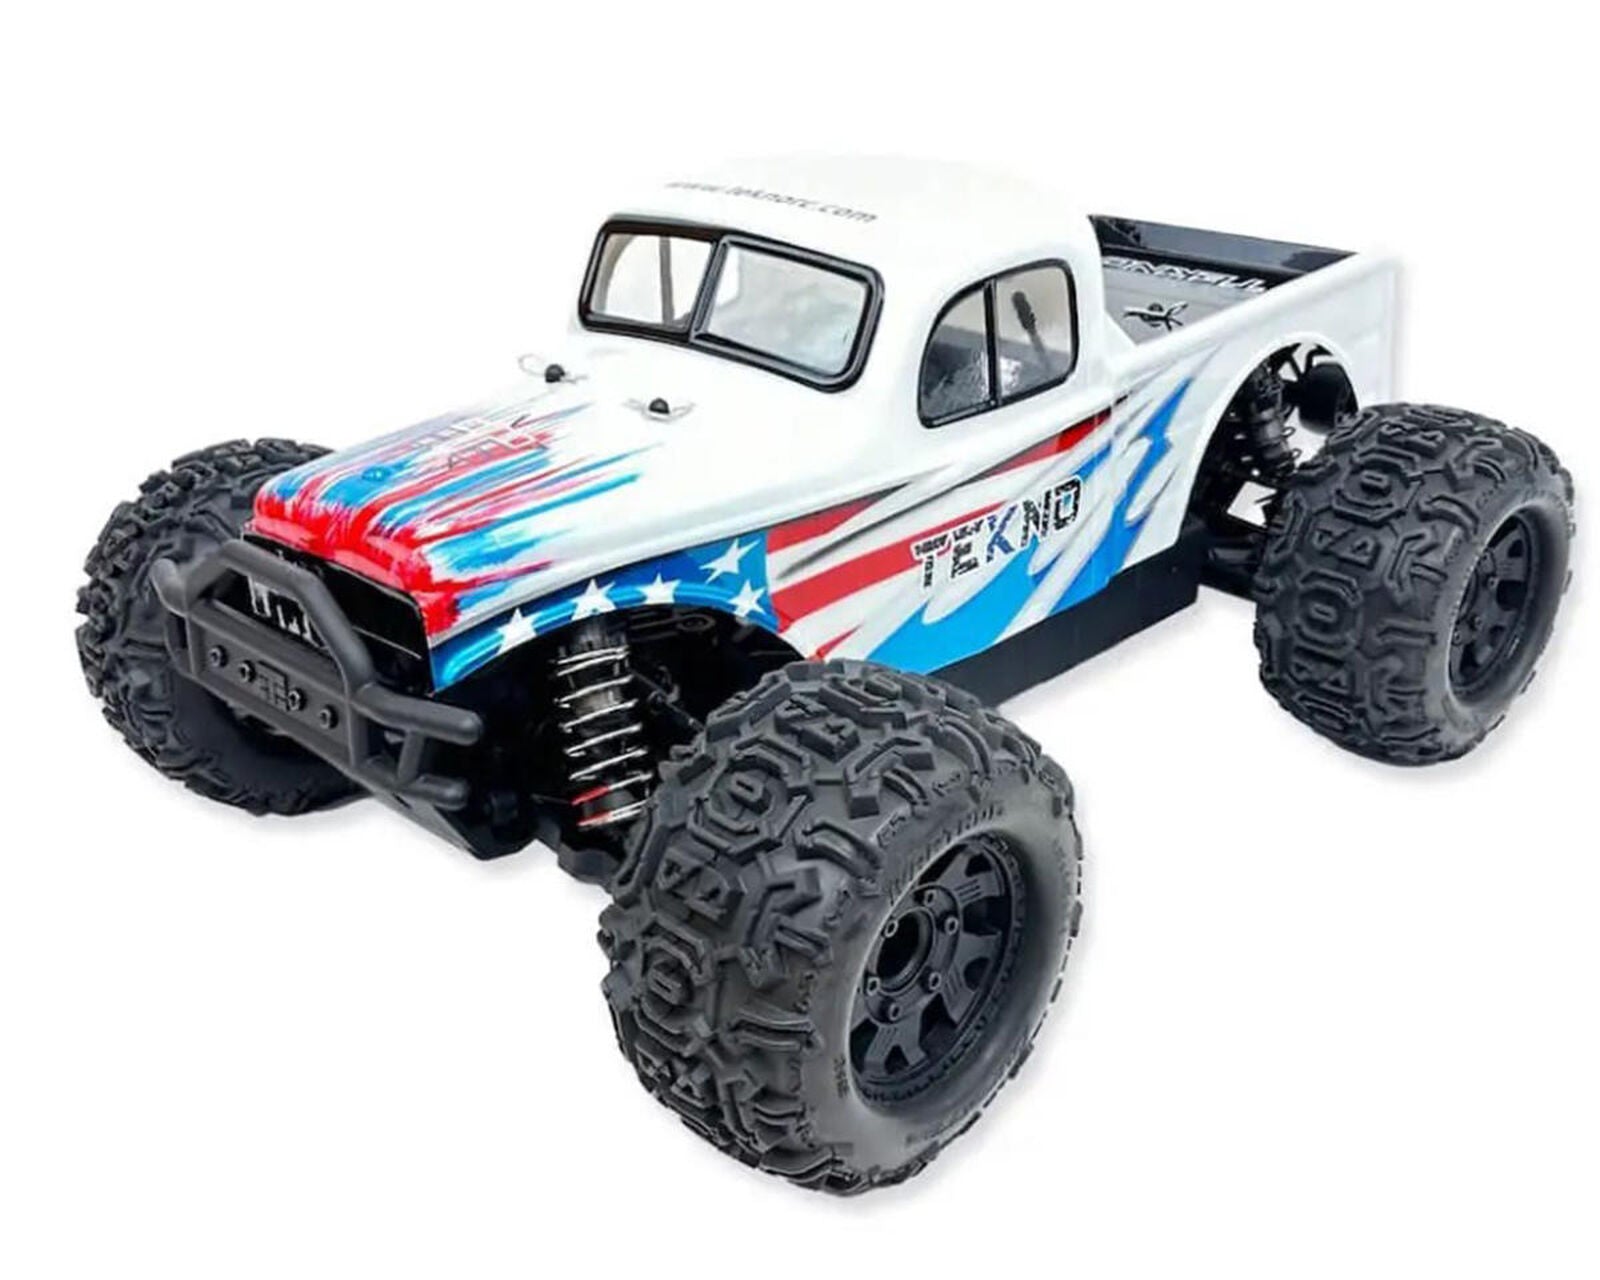 MT410 2.0 1/10th Electric 4x4 Pro Monster Truck Kit